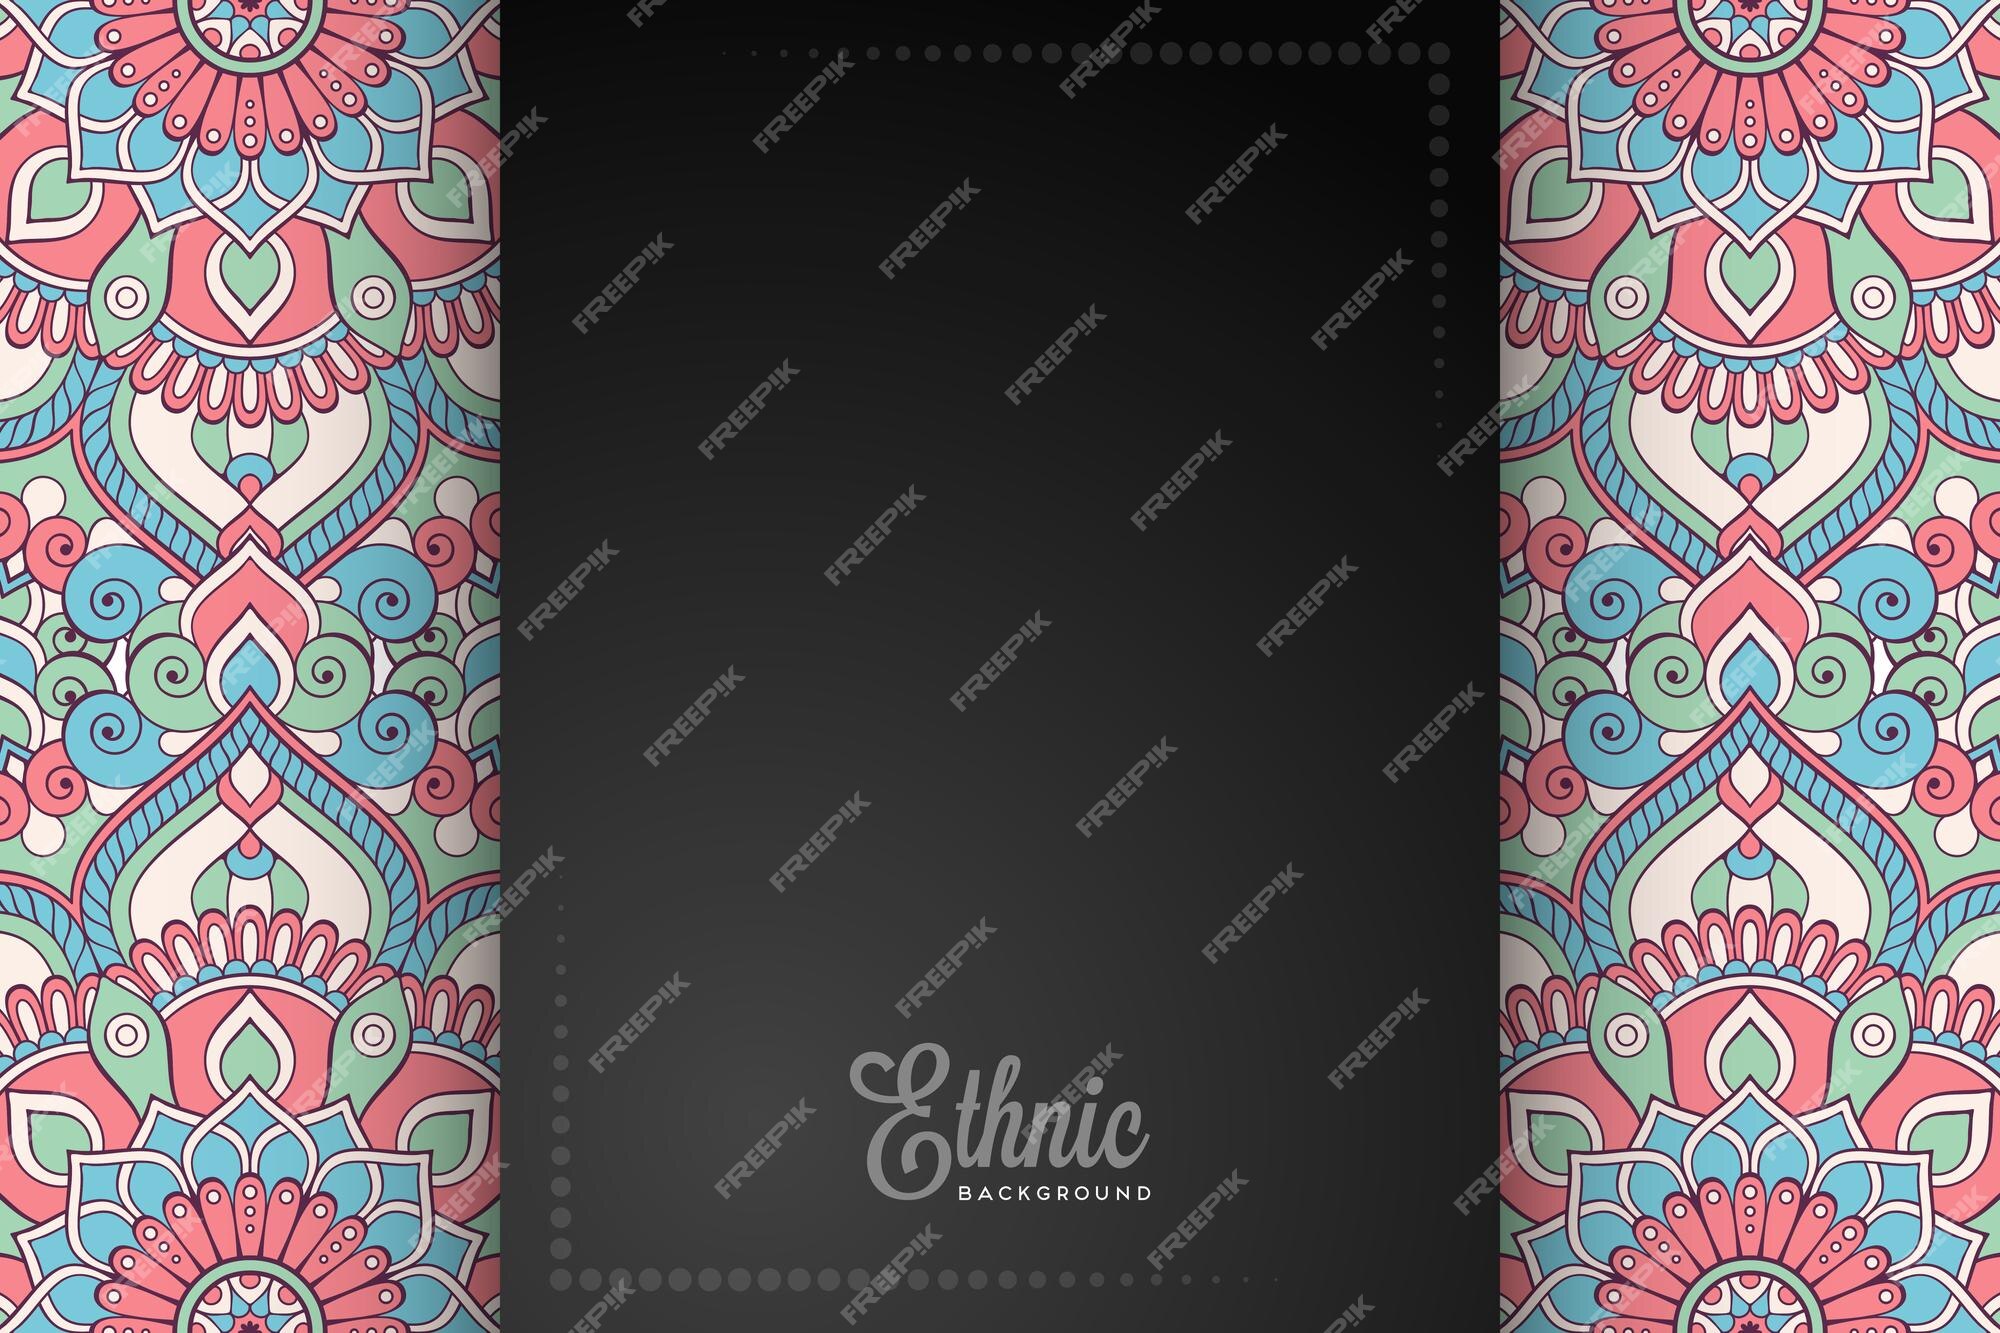 Premium Vector  Simple background with geometric elements